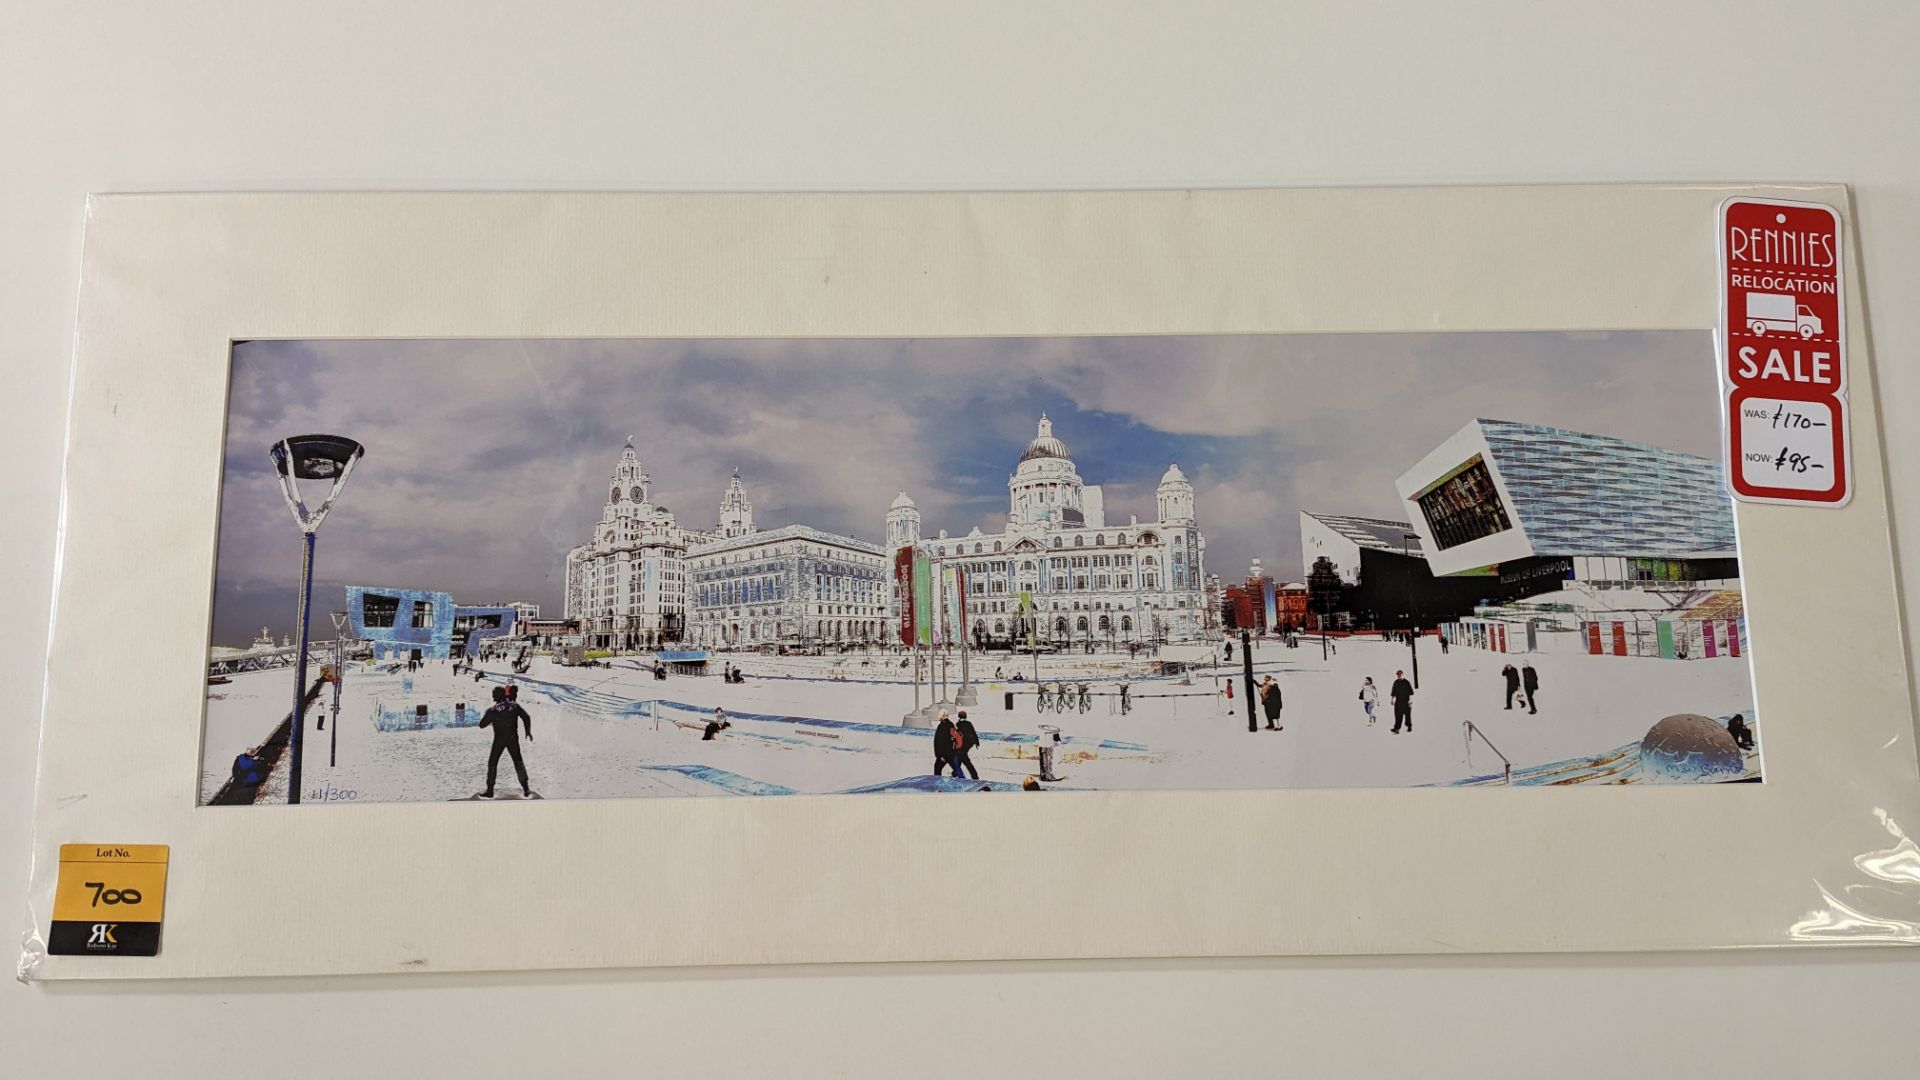 Limited edition print, no. 11/300, of Liverpool scene by M W Burns. Original selling price £170. In - Image 2 of 11